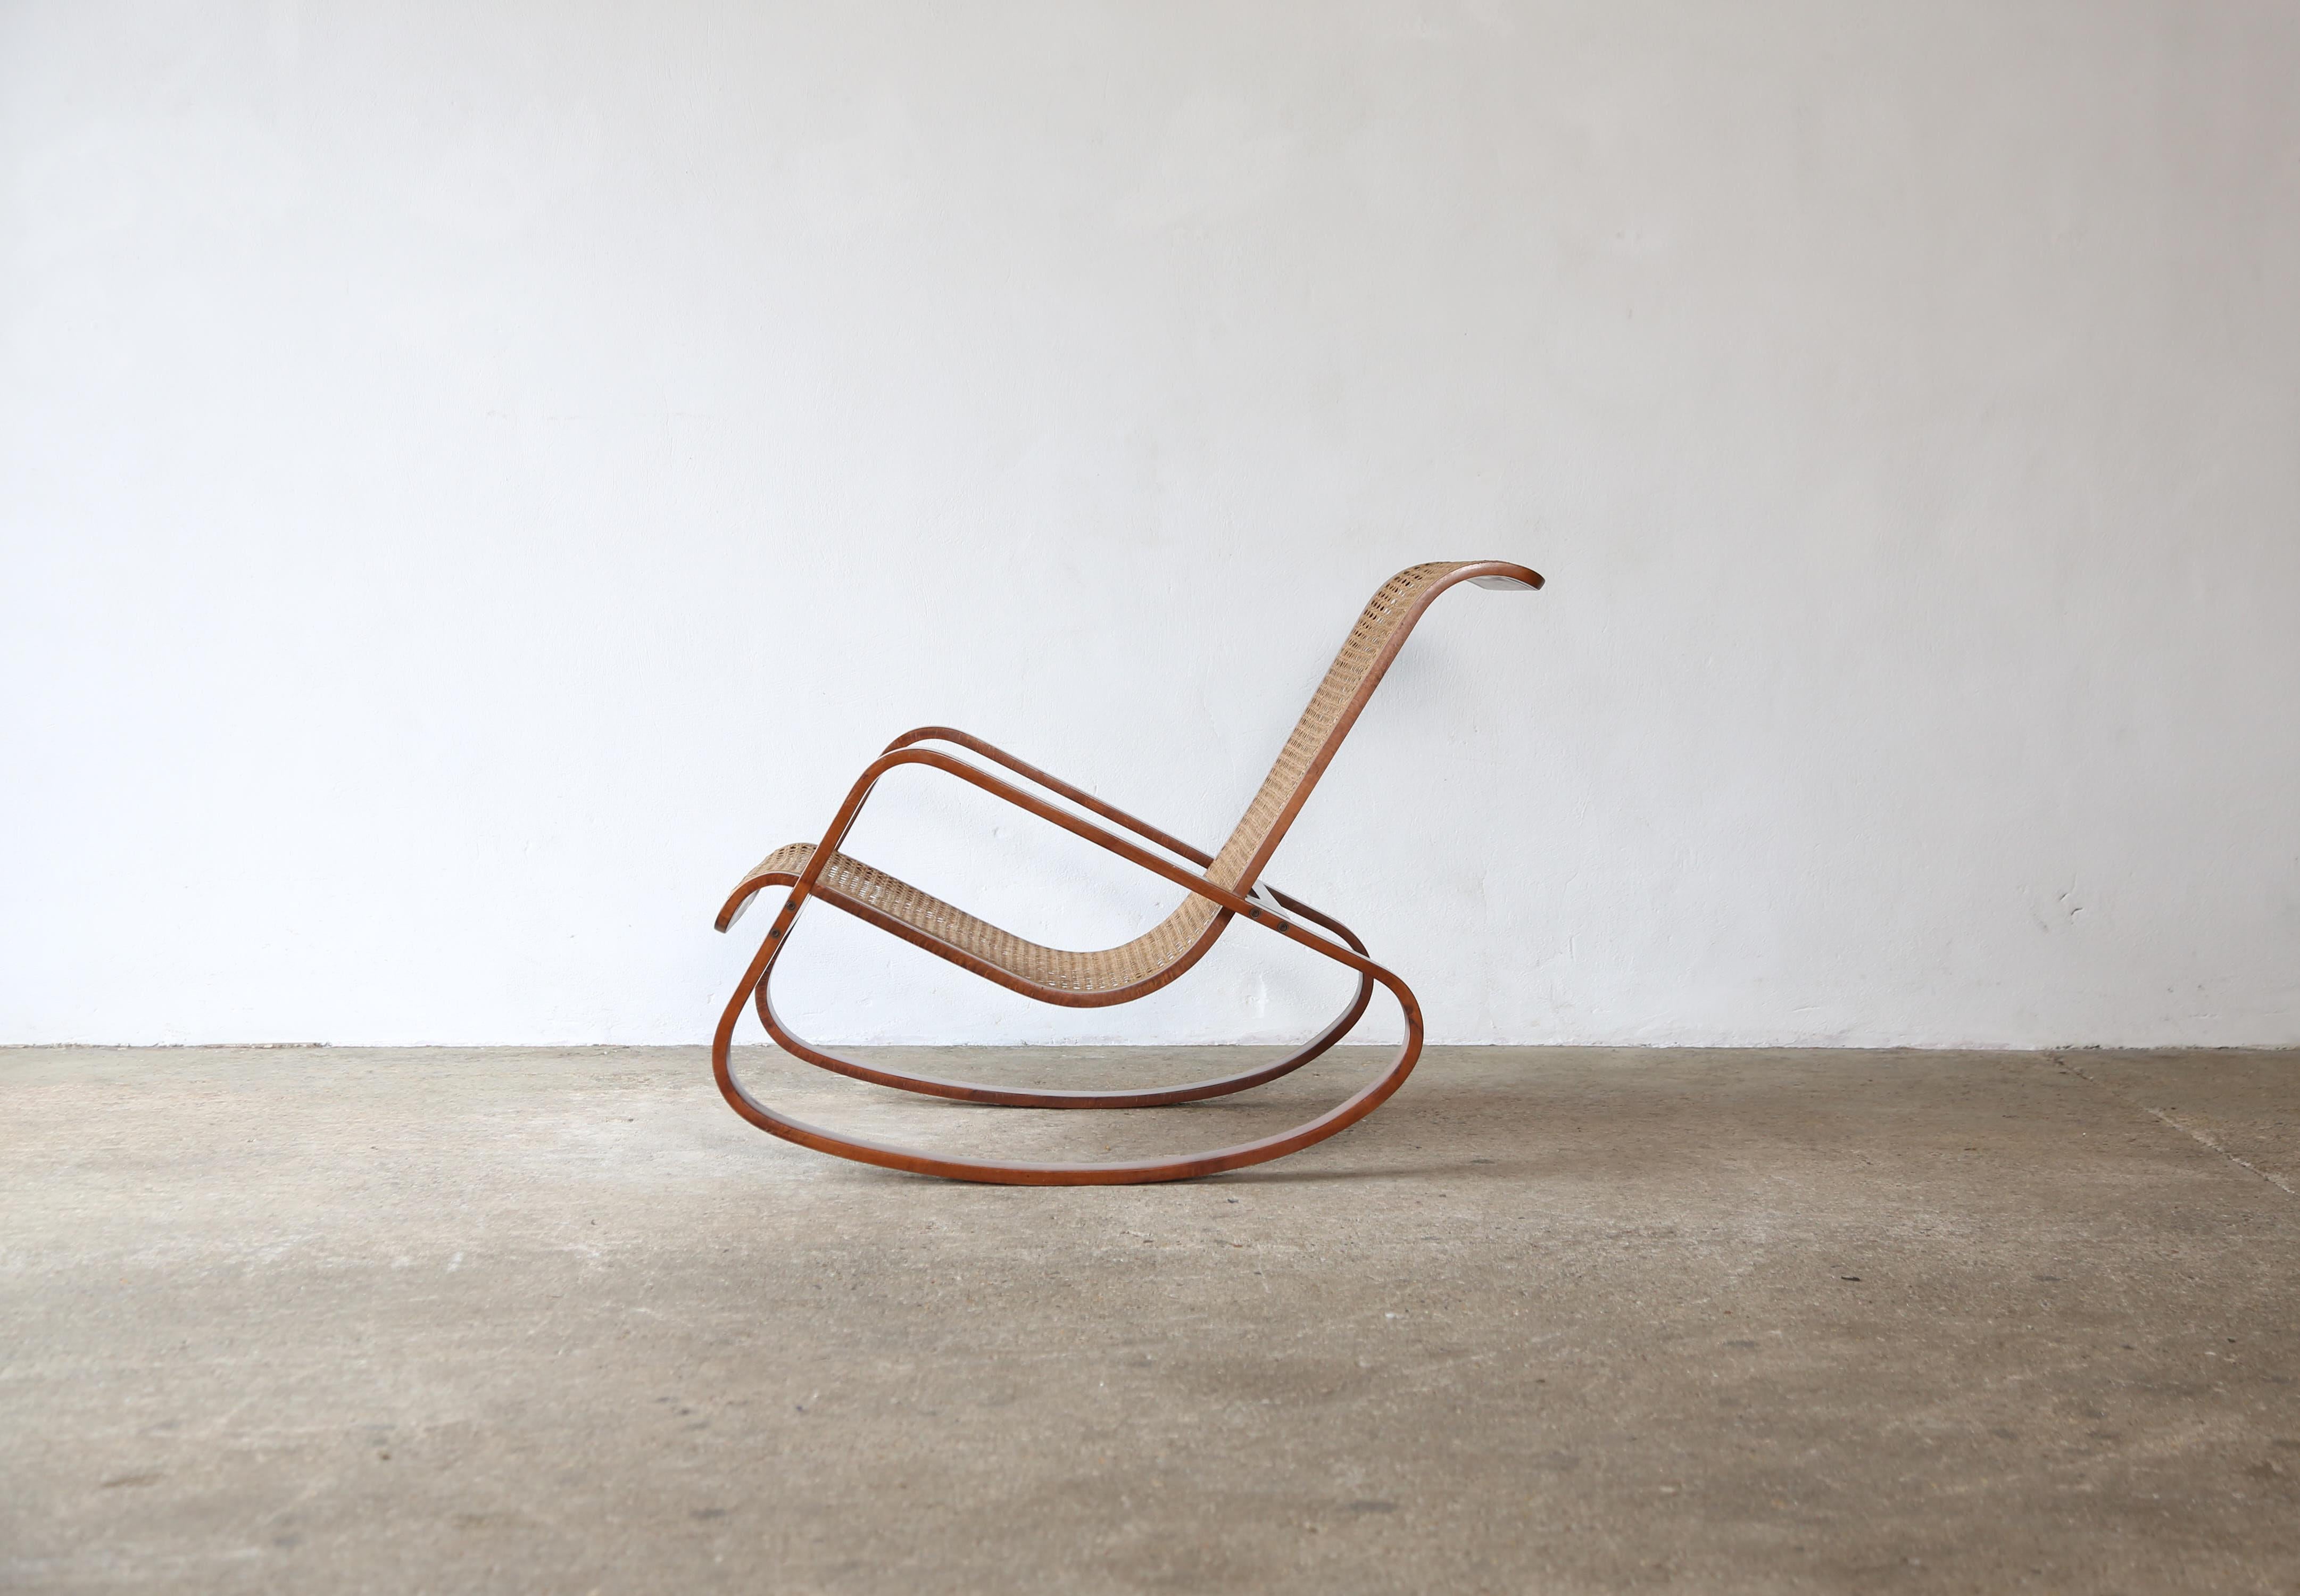 An original Dondolo rocking chair by Luigi Crassevig, Italy, 1970s.  Bentwood and original cane.   Fast shipping worldwide.

